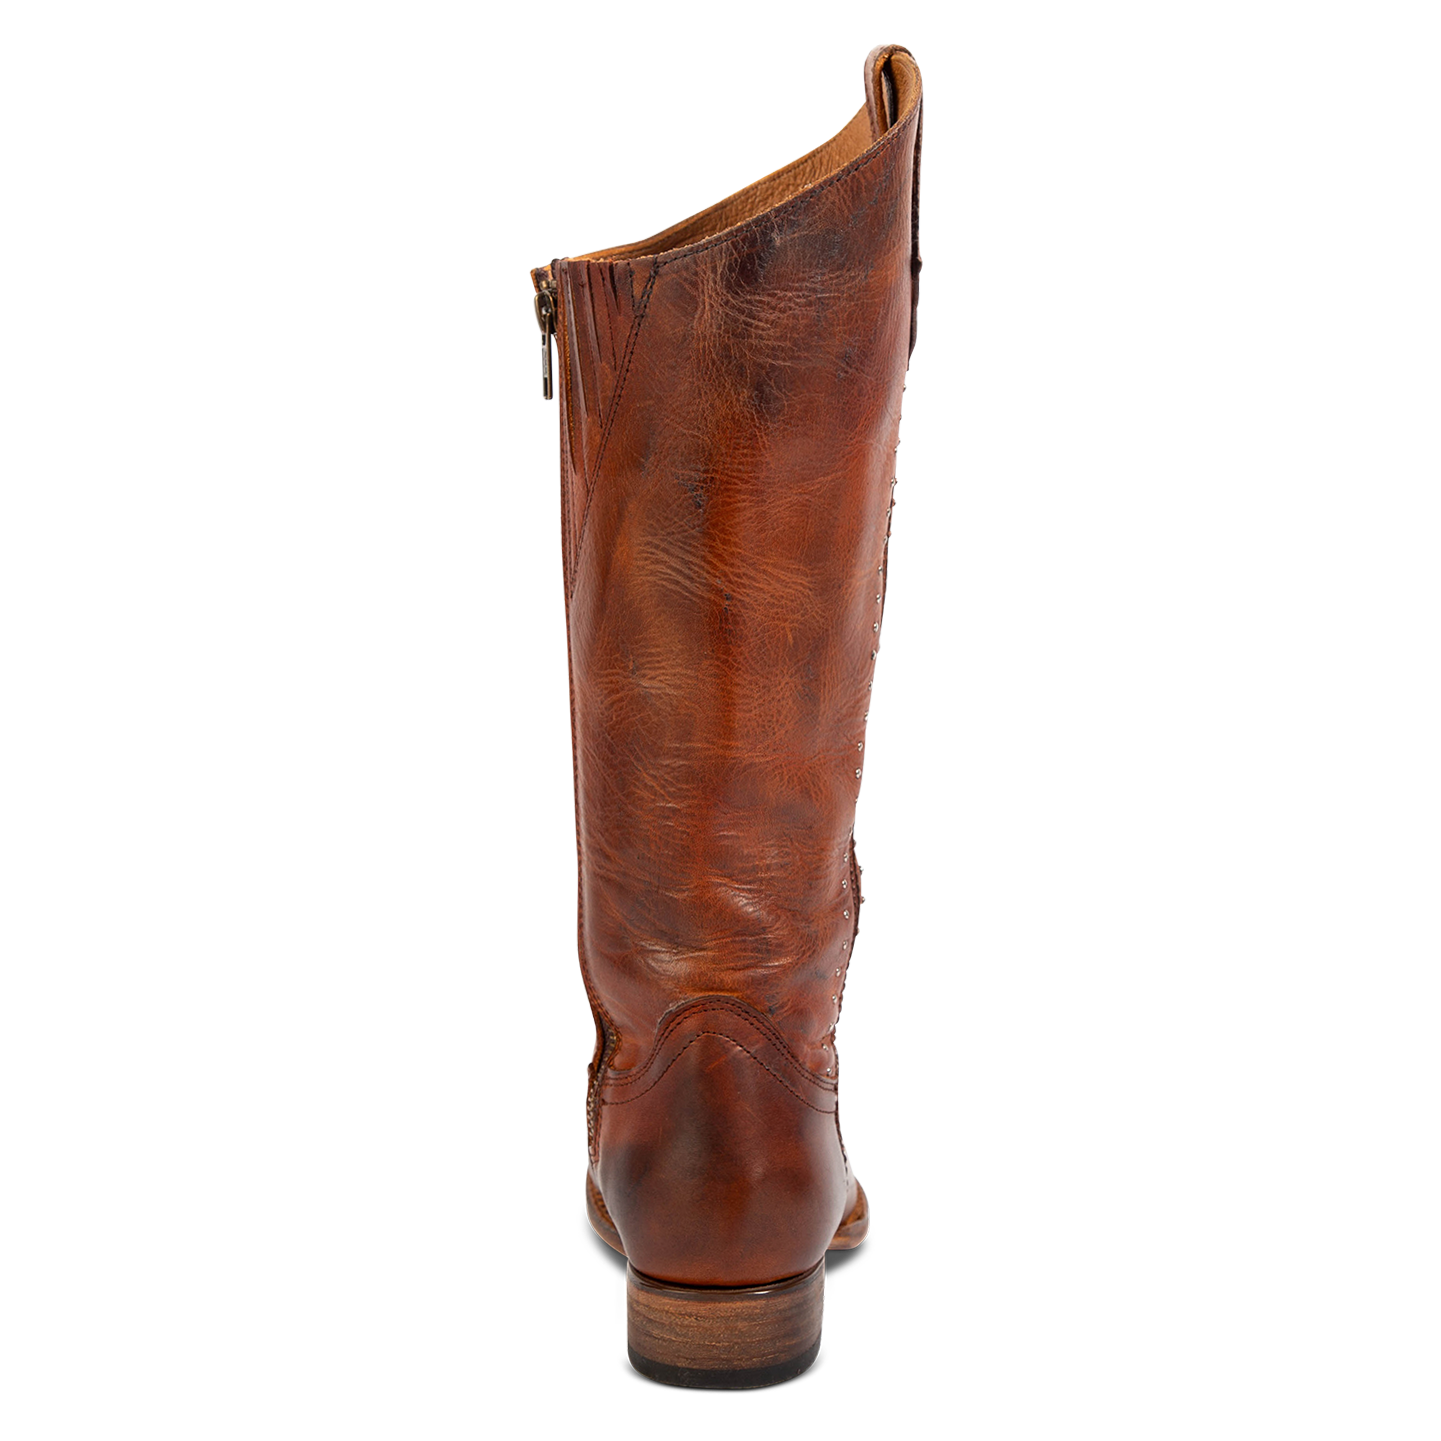 Back view showing low heel on FREEBIRD women's RIgger tan leather boot